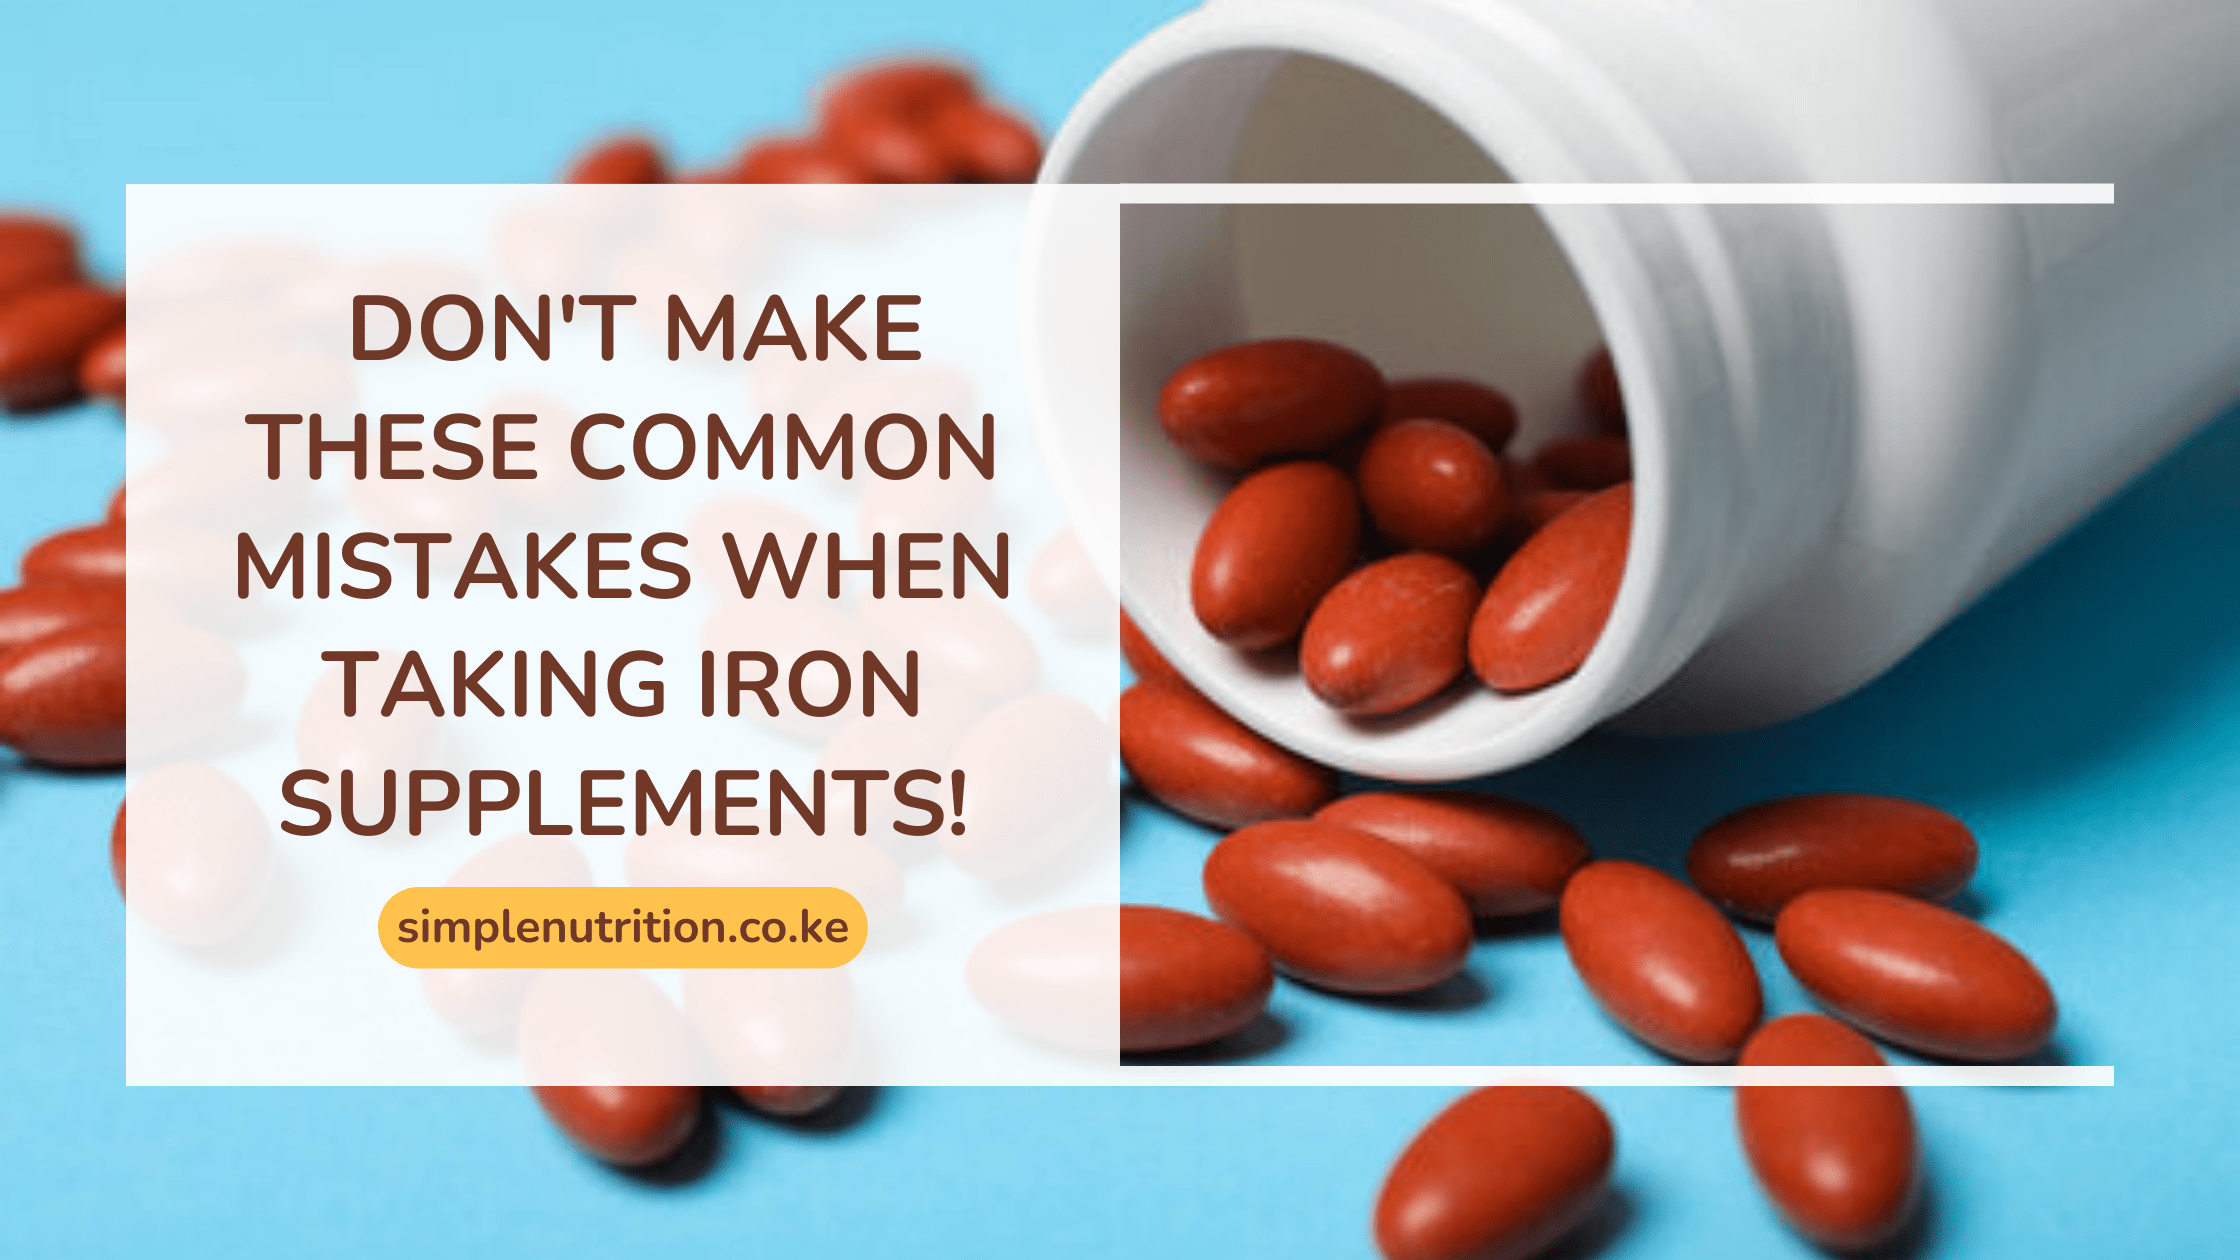 Iron supplements! Don’t make these mistakes when taking them.